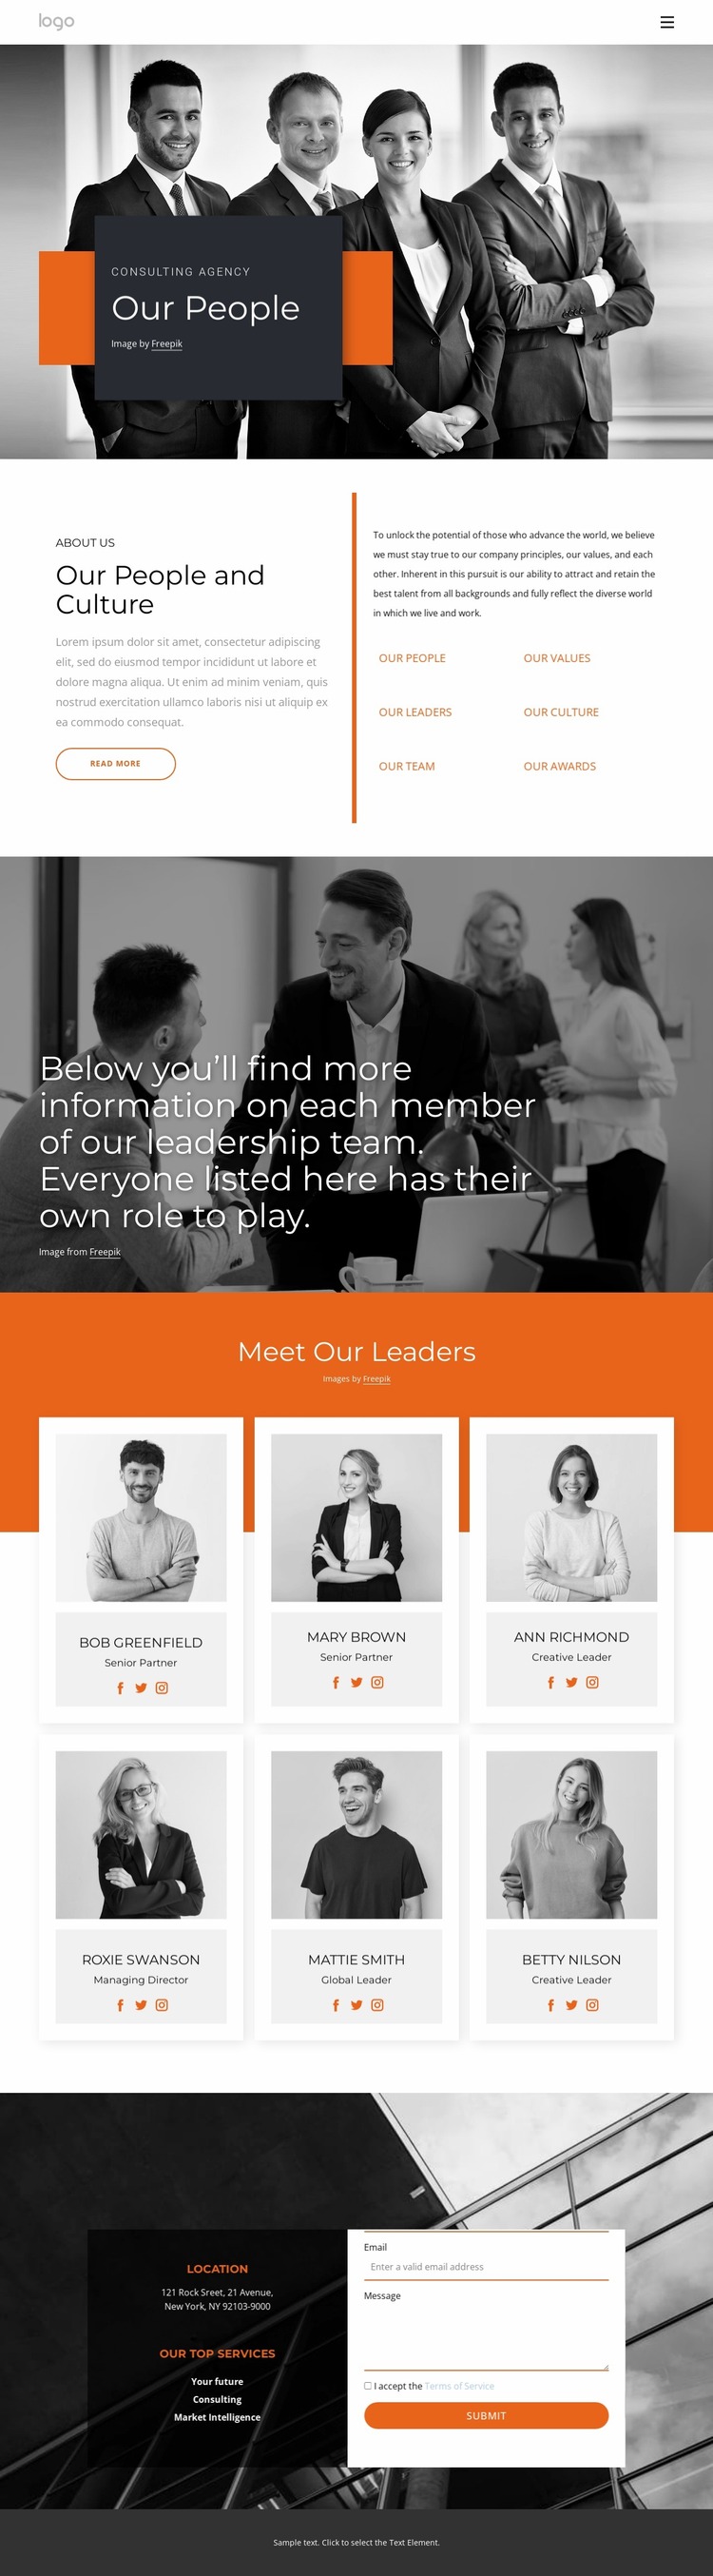 Our people and our culture Website Mockup